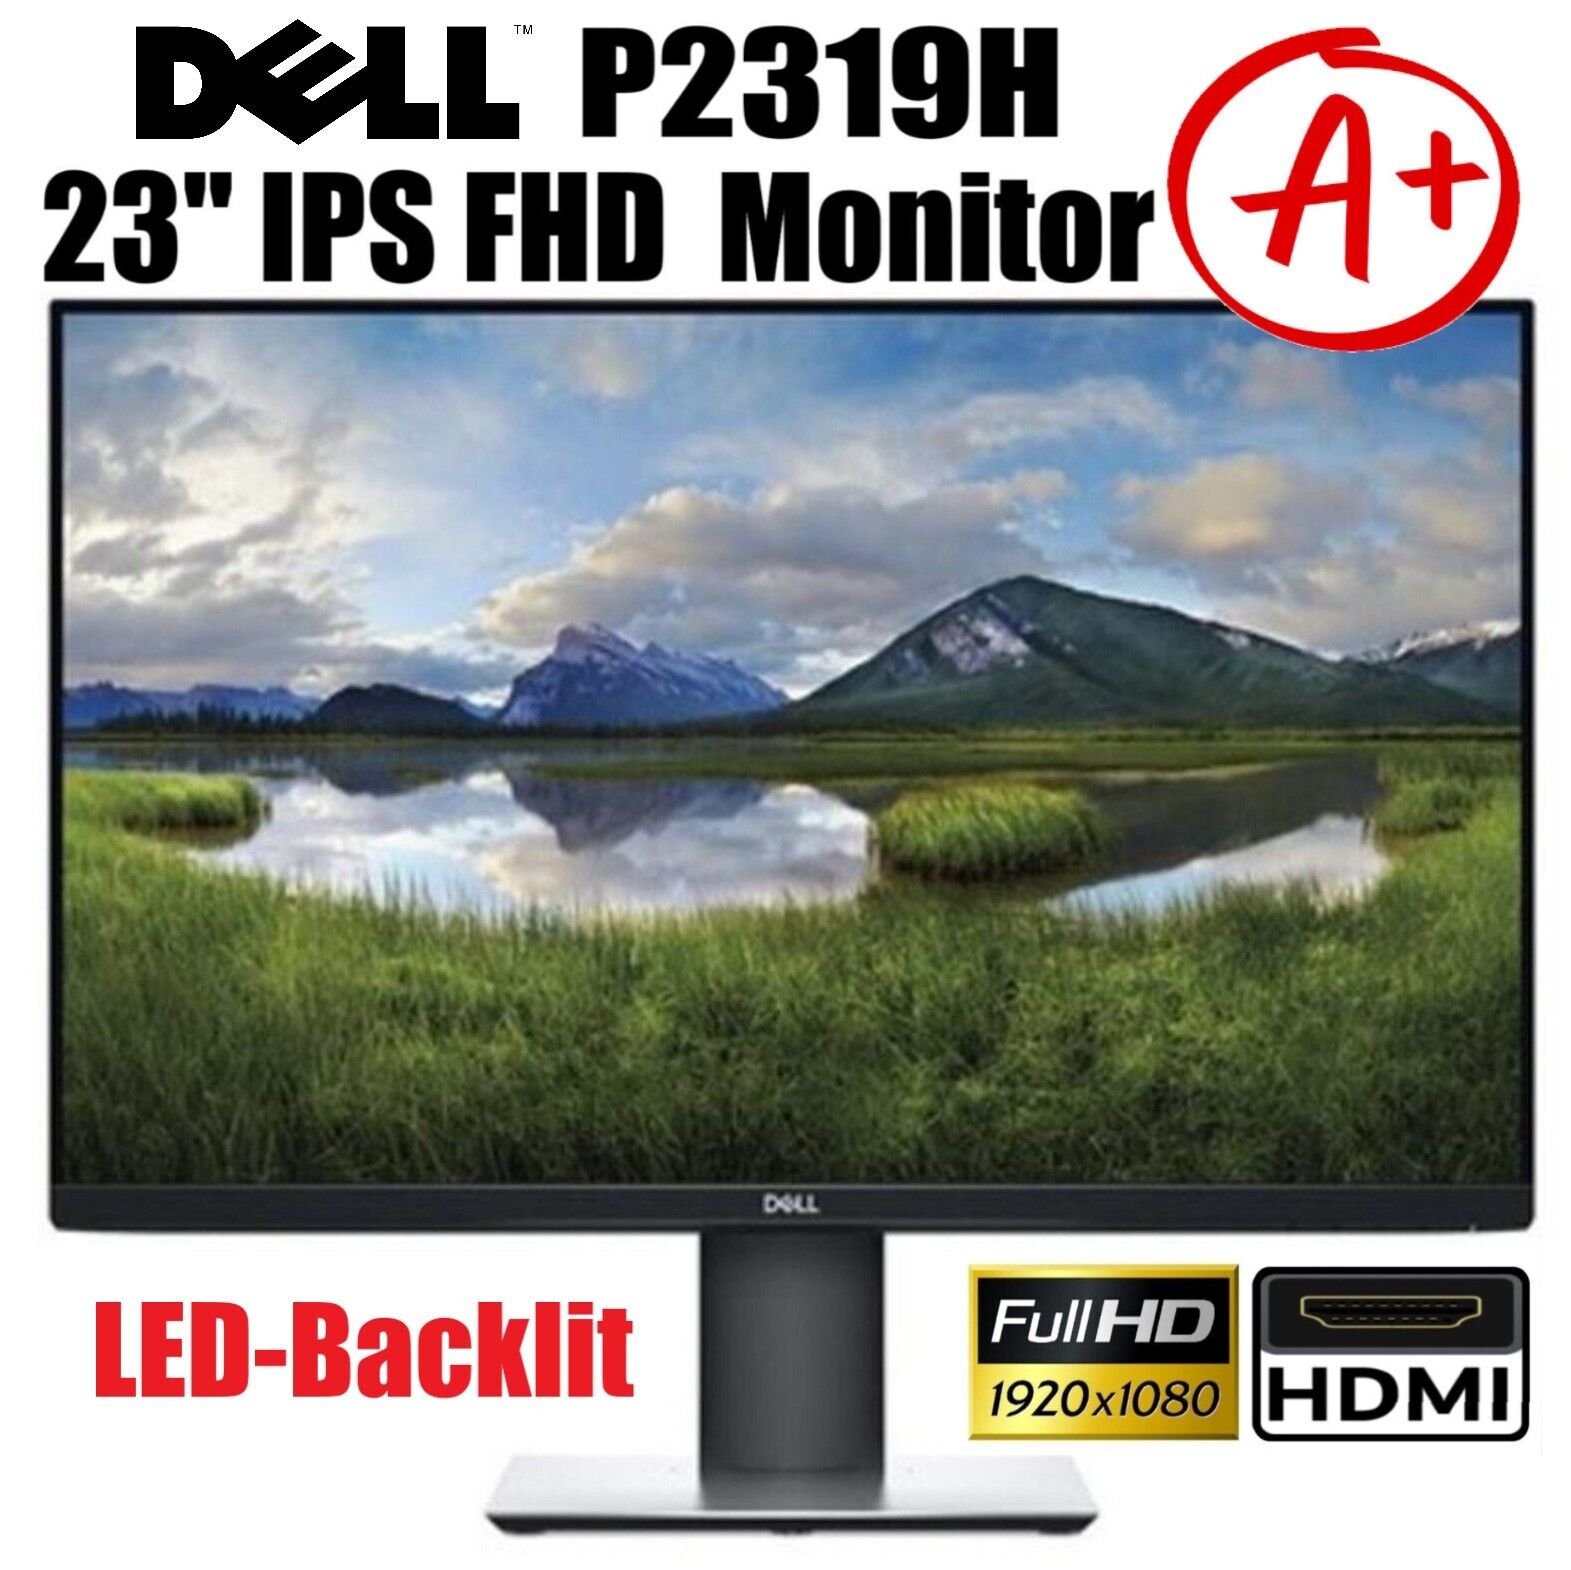 A+ Excellent DELL P2319H 23inch Full-HD LED-Backlit IPS LCD Monitor USB DP HDMI